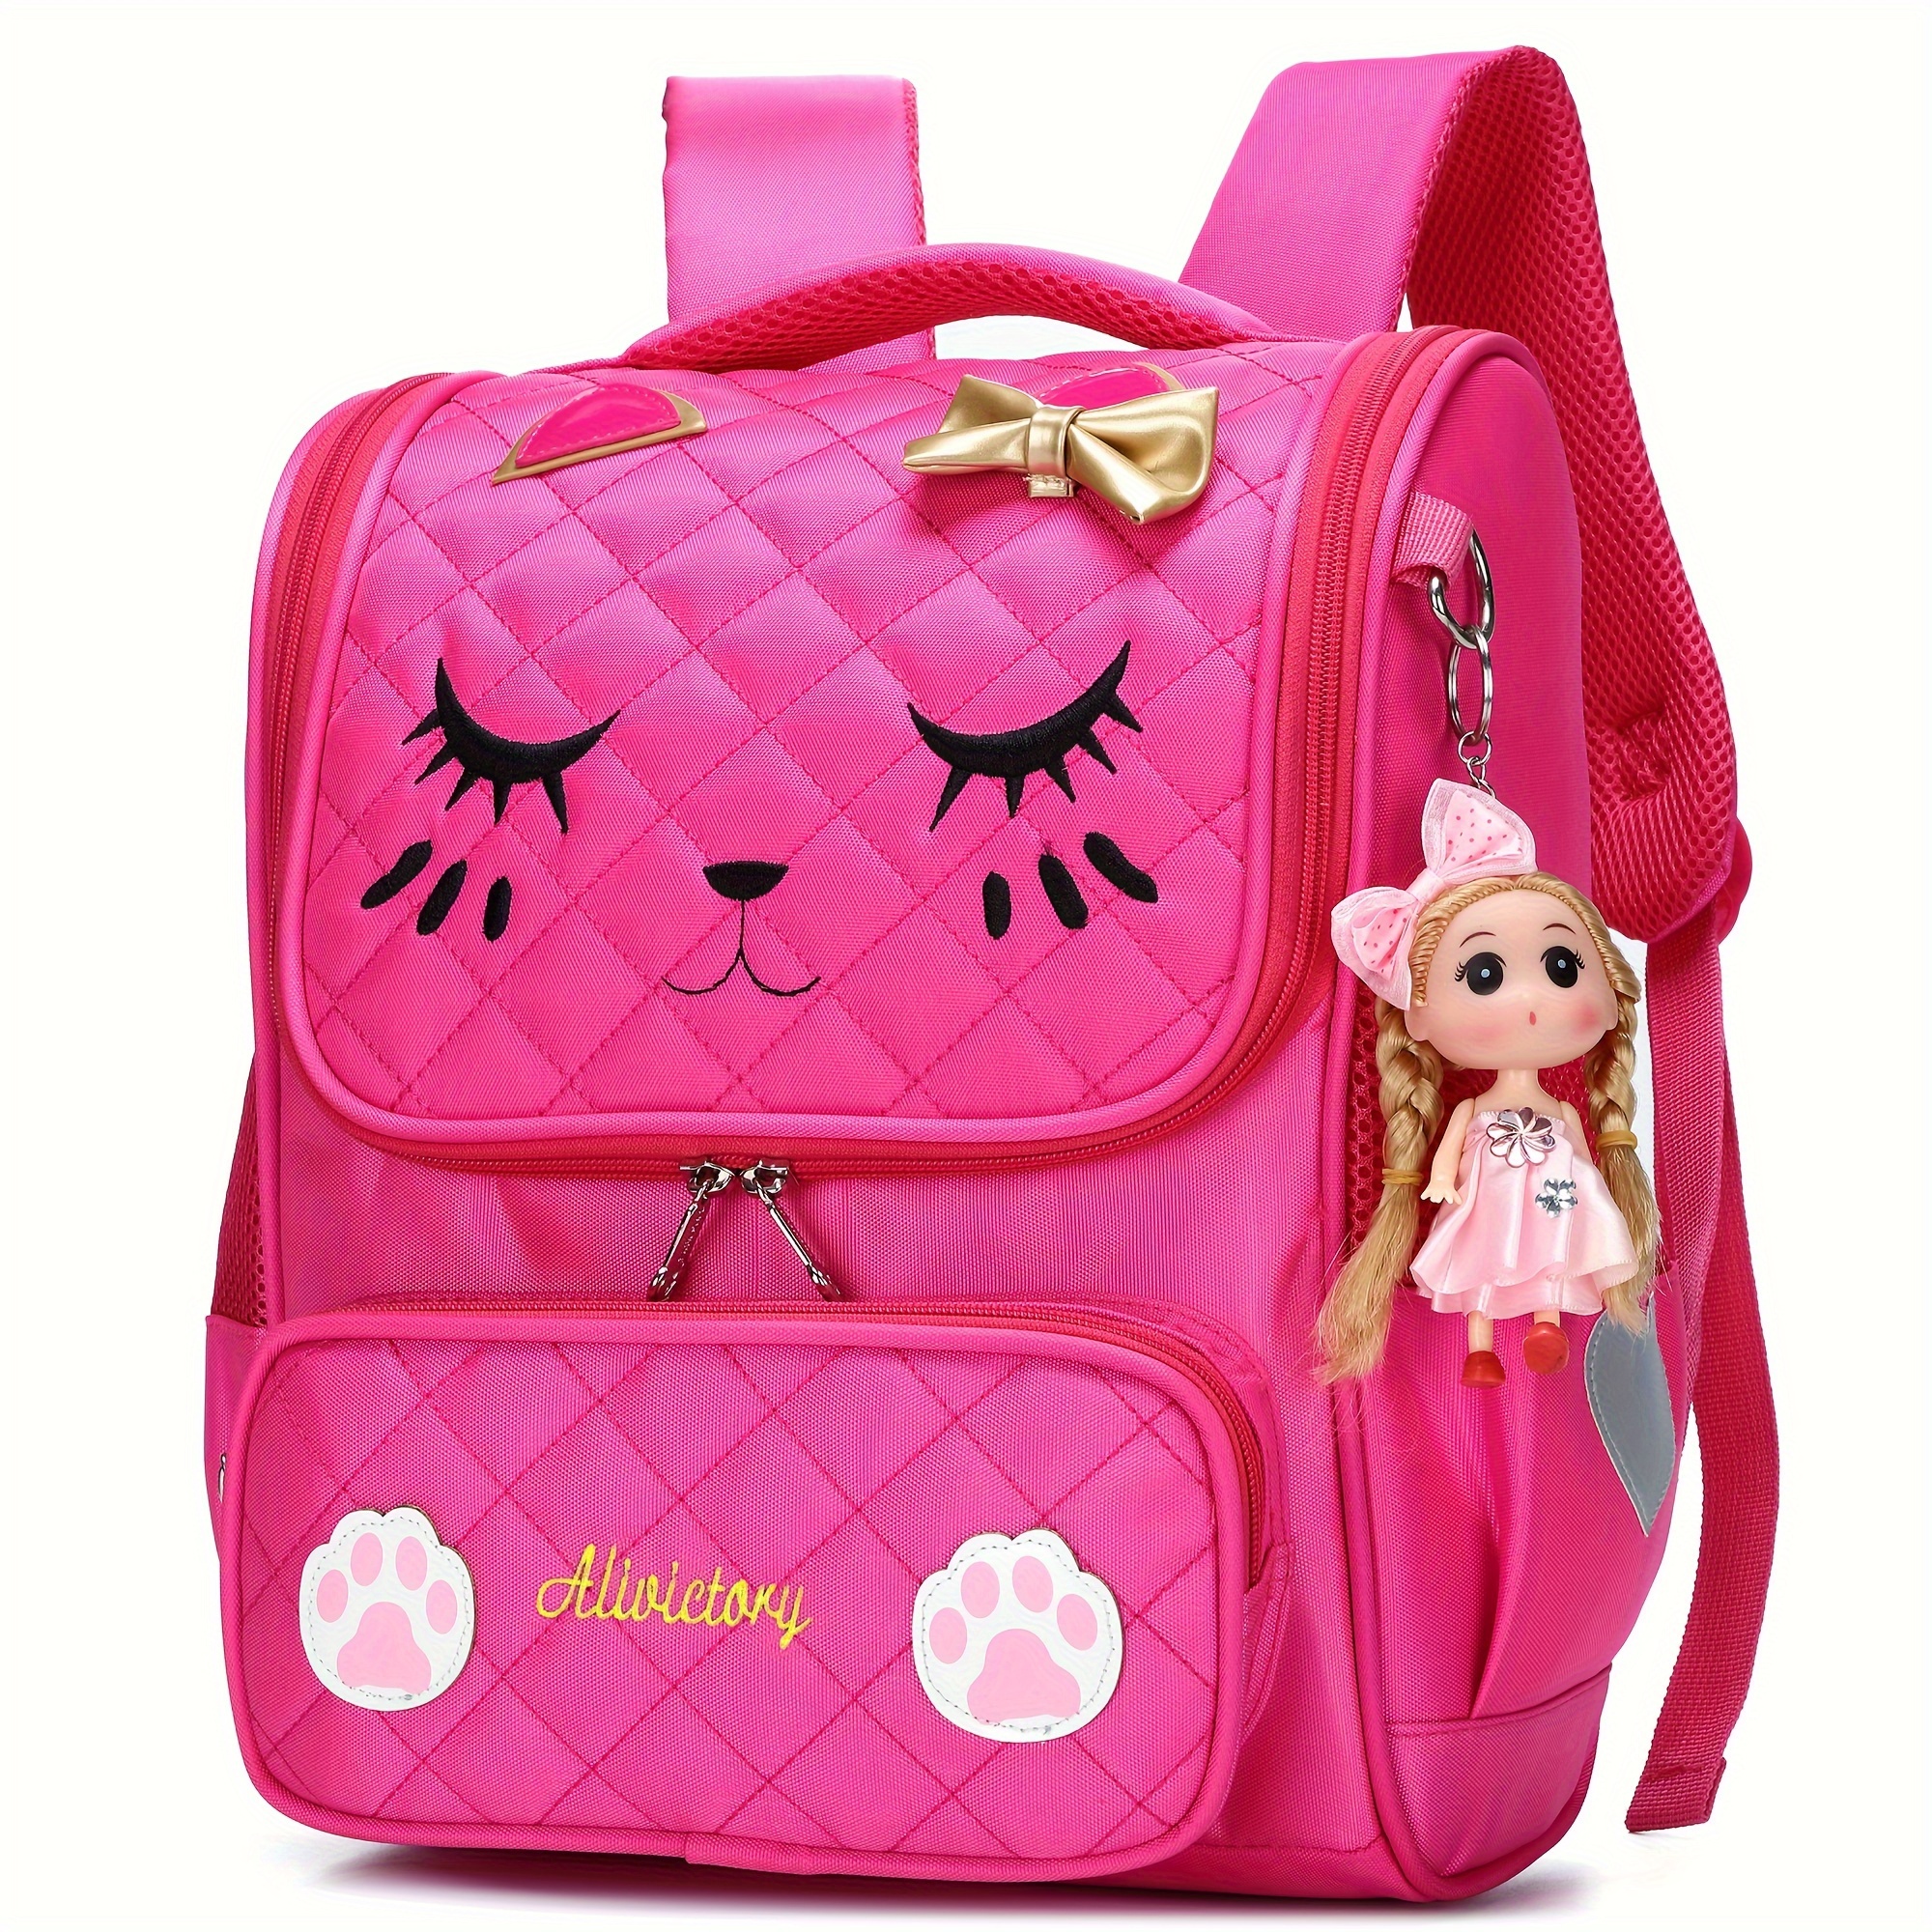 

Kawaii School Backpack, Cute Large Capacity Teen Nylon Bookbag With Anti-theft Pocket, Doll And Keychain Accessory, Adjustable Straps, Side Pockets For Water Bottle, Perfect For Travel And School Use